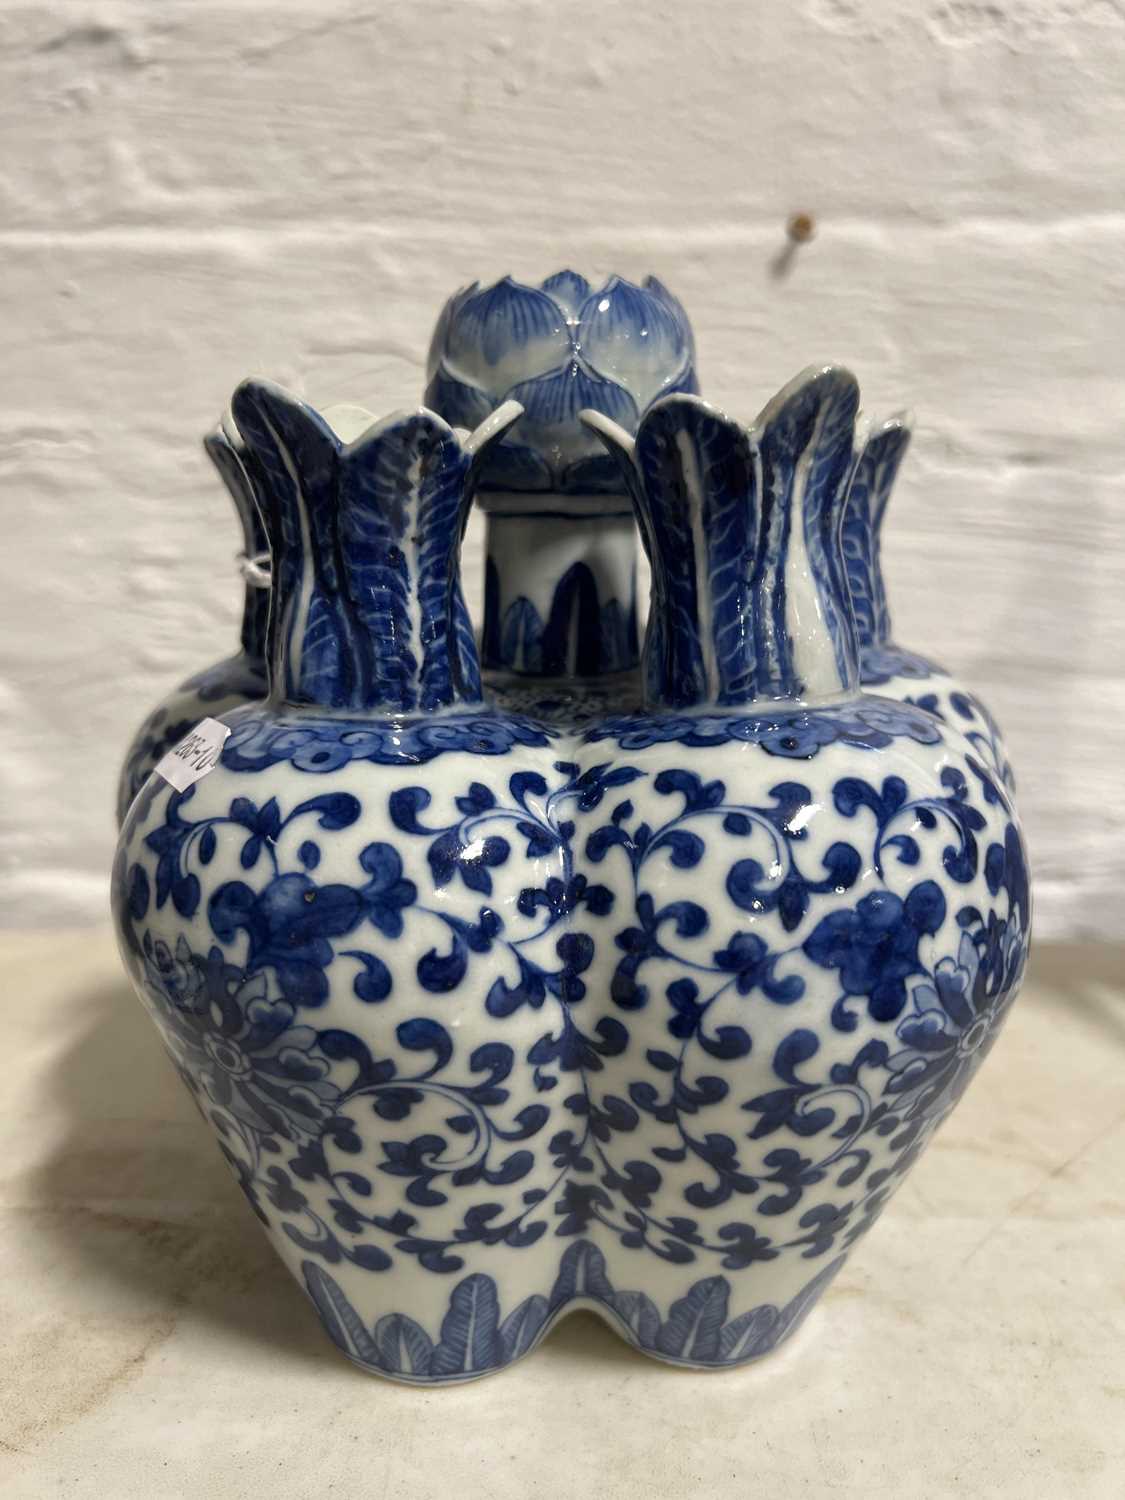 Chinese porcelain blue and white tulip or bulb vase, 19th century - Image 6 of 9